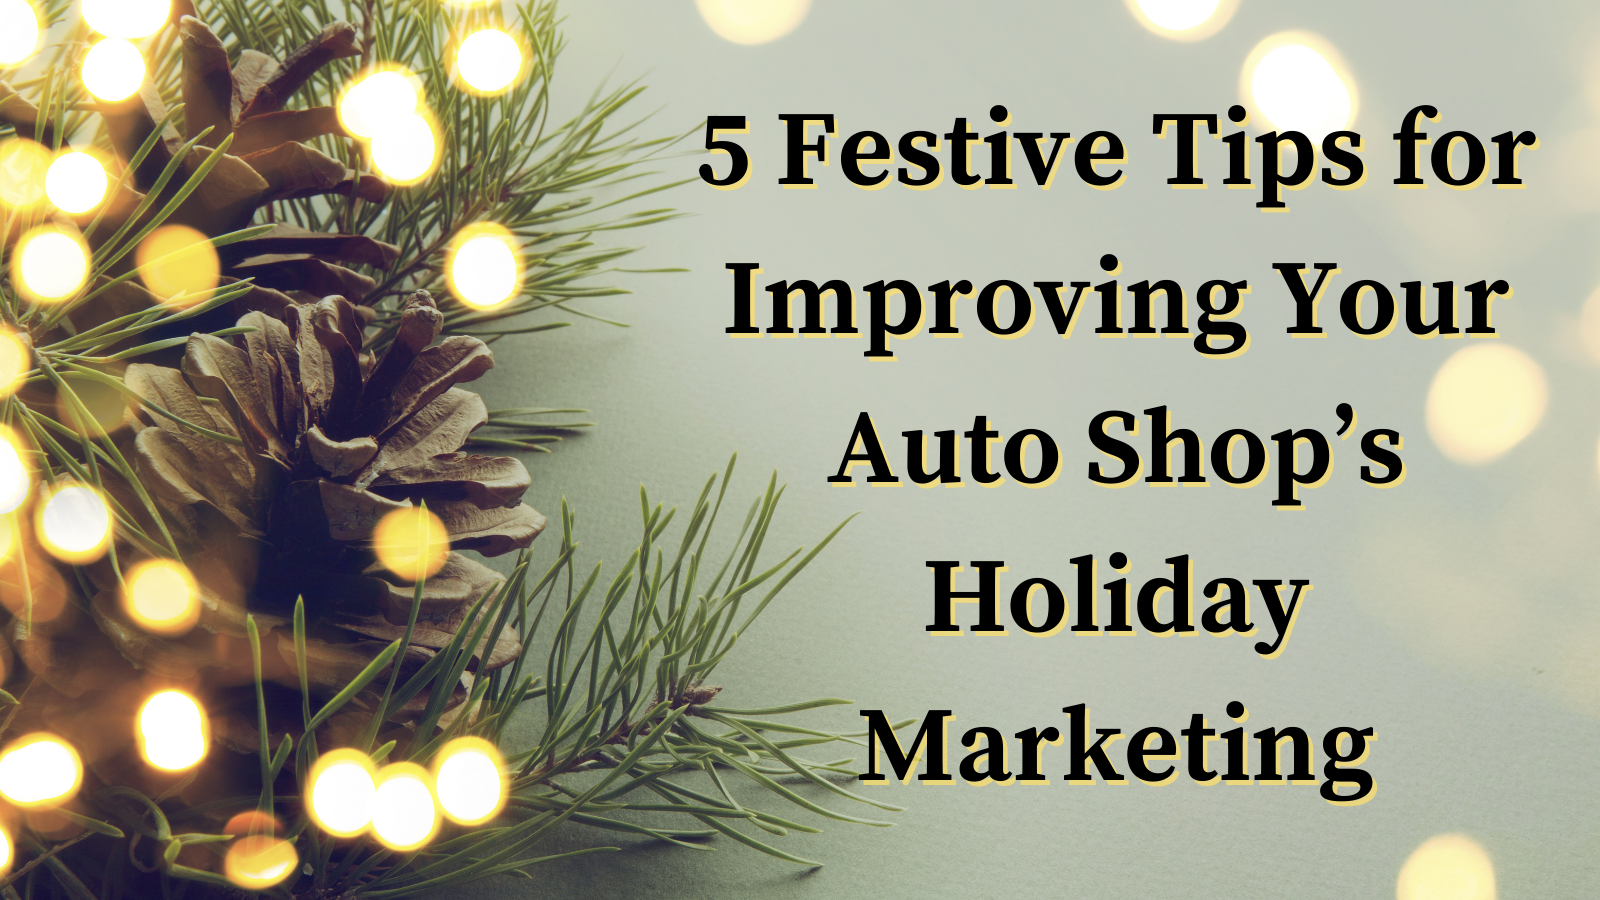 5 festive tips for improving your holiday marketing